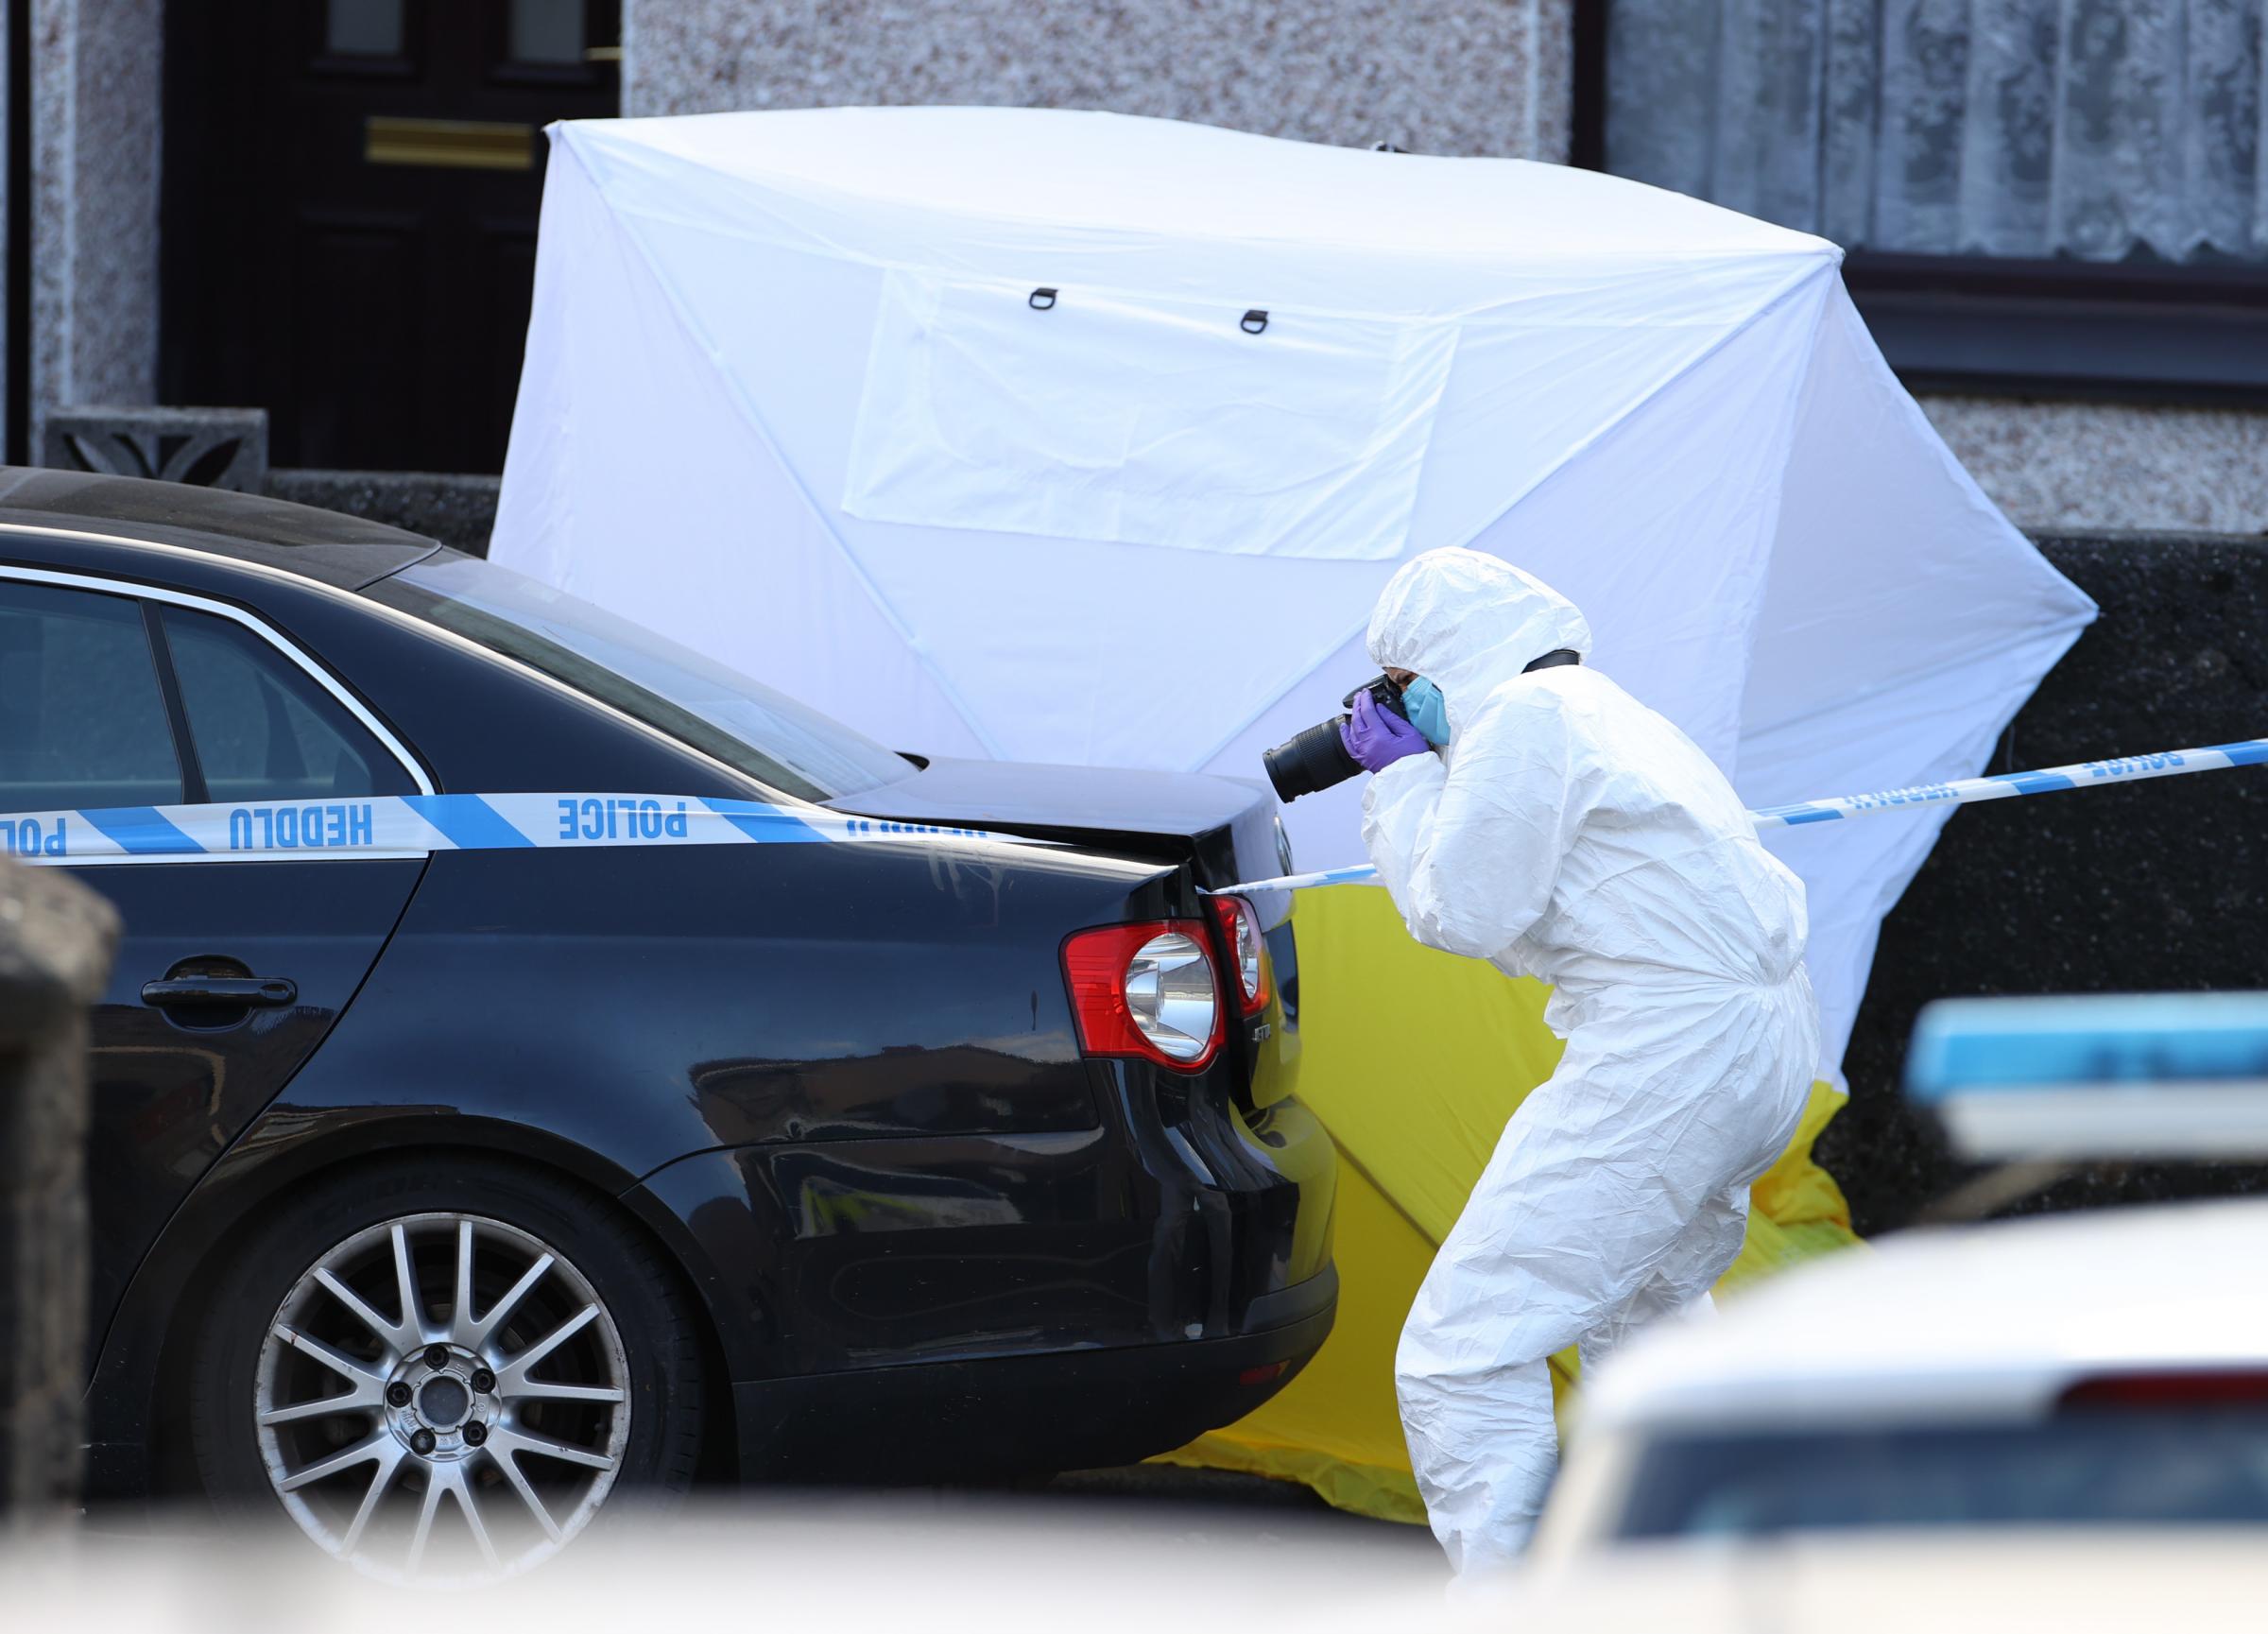 05.03.21 Police Incident, Rhonnda -Police forensic examiners at the scene of serious incident involving a number of casualties outside the Blue Sky takeaway on Baglan Street in Treorchy, Rhondda, South Wales